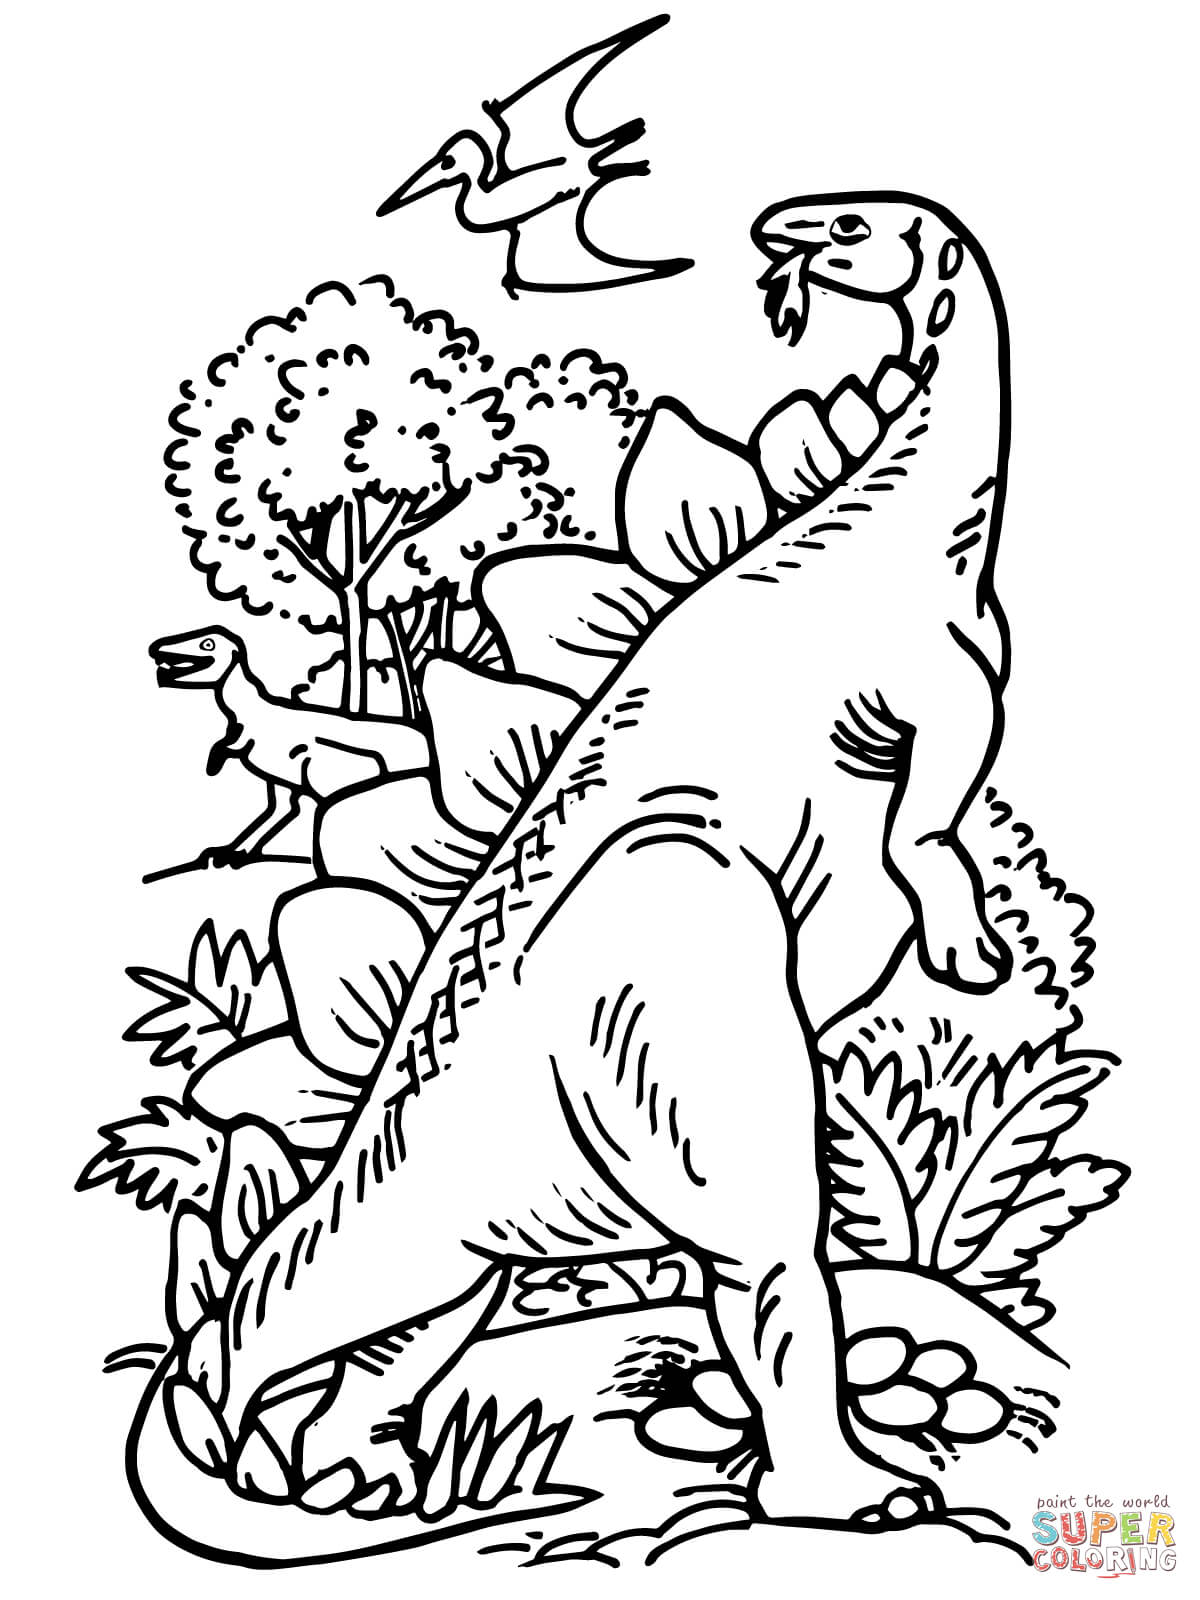 Pteranodon coloring pages | Free Coloring Pages